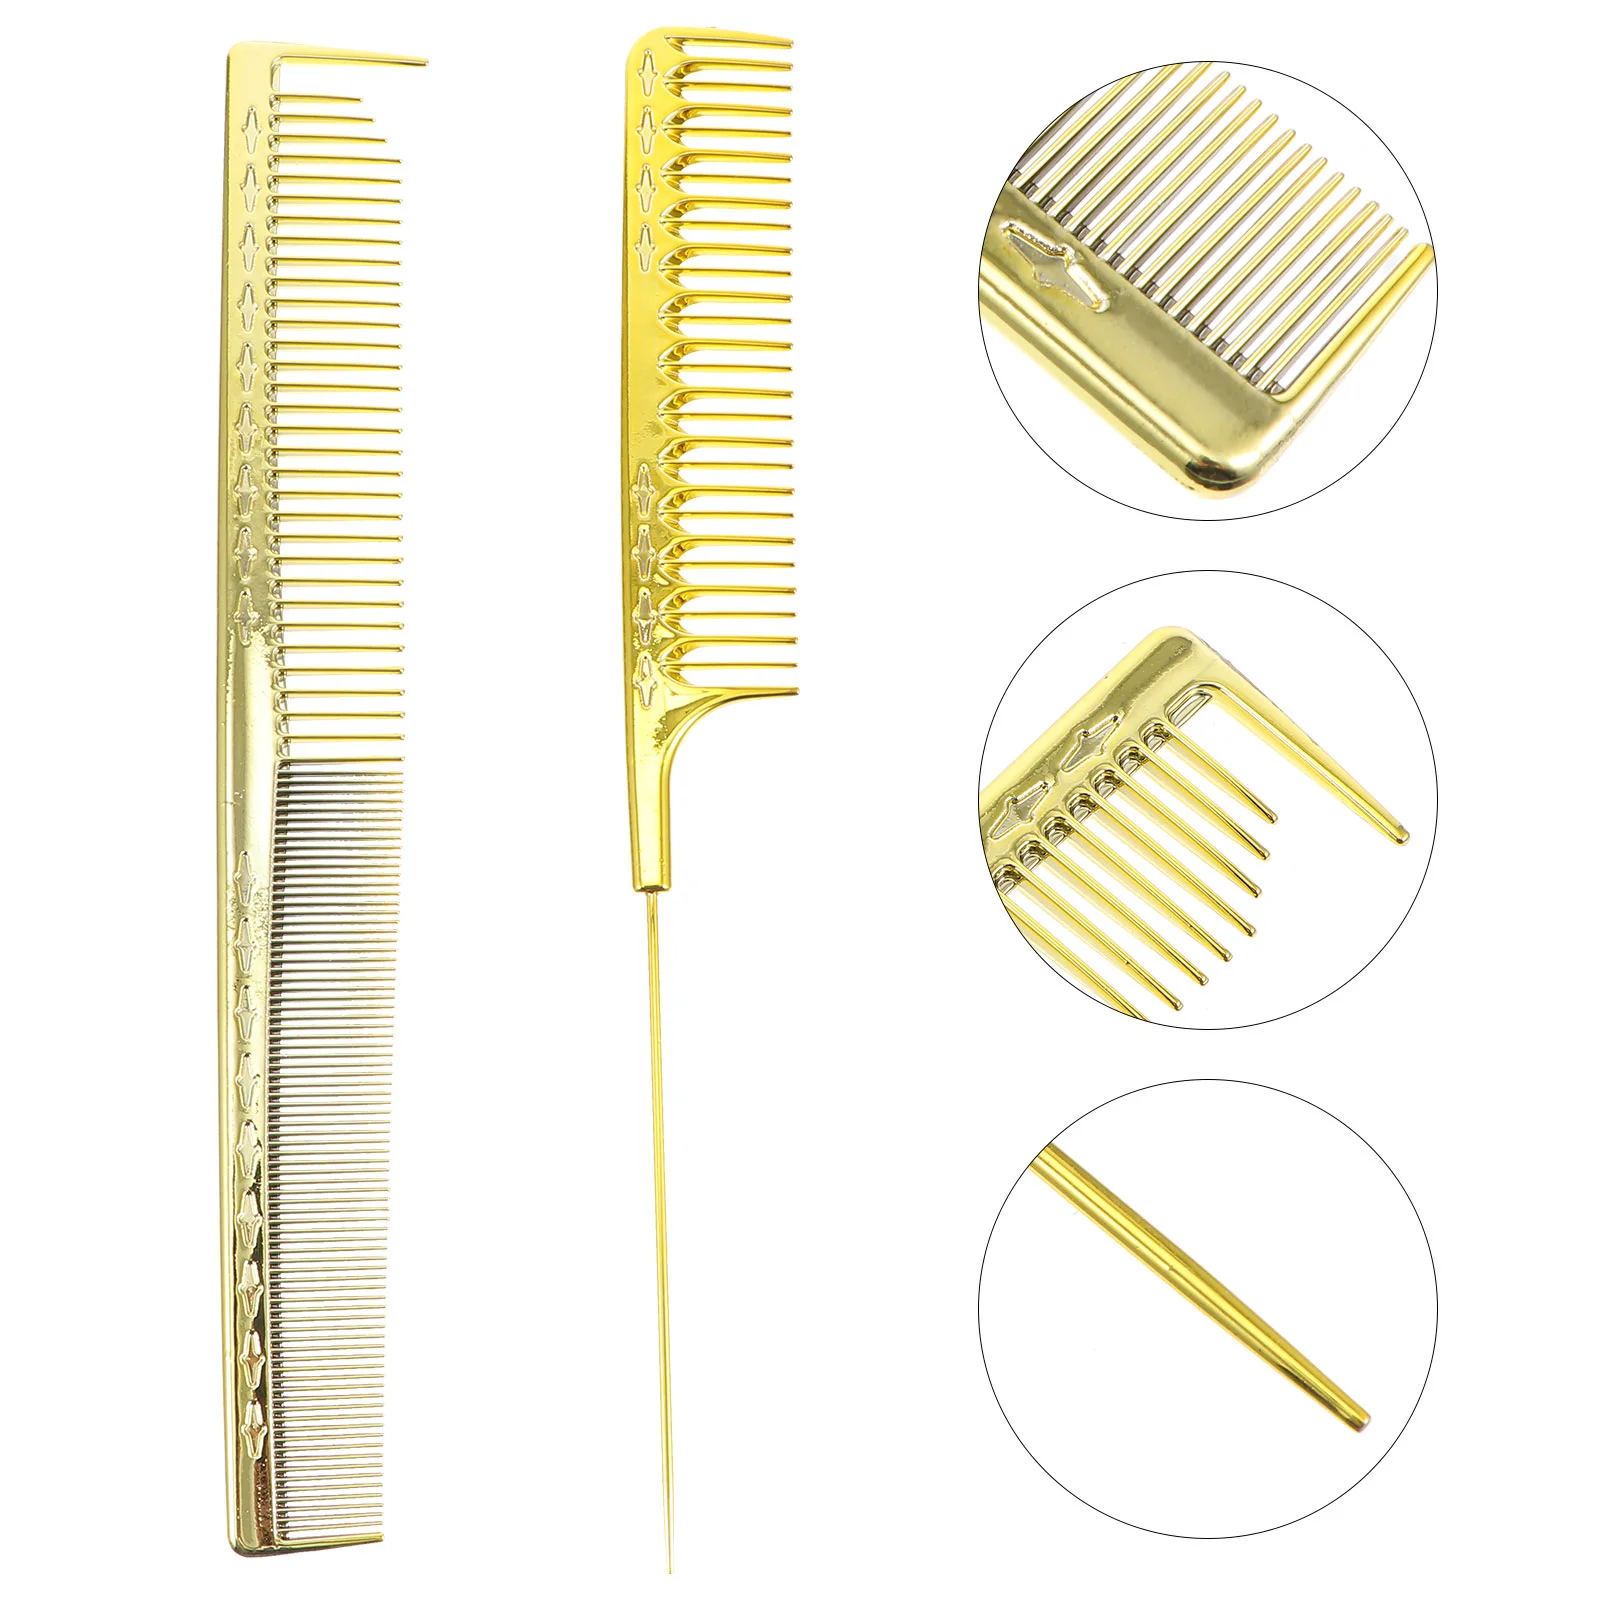 

Comb Hair Cutting Styling Tail Hairdressing Static Anti Haircut Fine Brush Combs Rat Tooth Detangling Mens Salon Barber Barbers